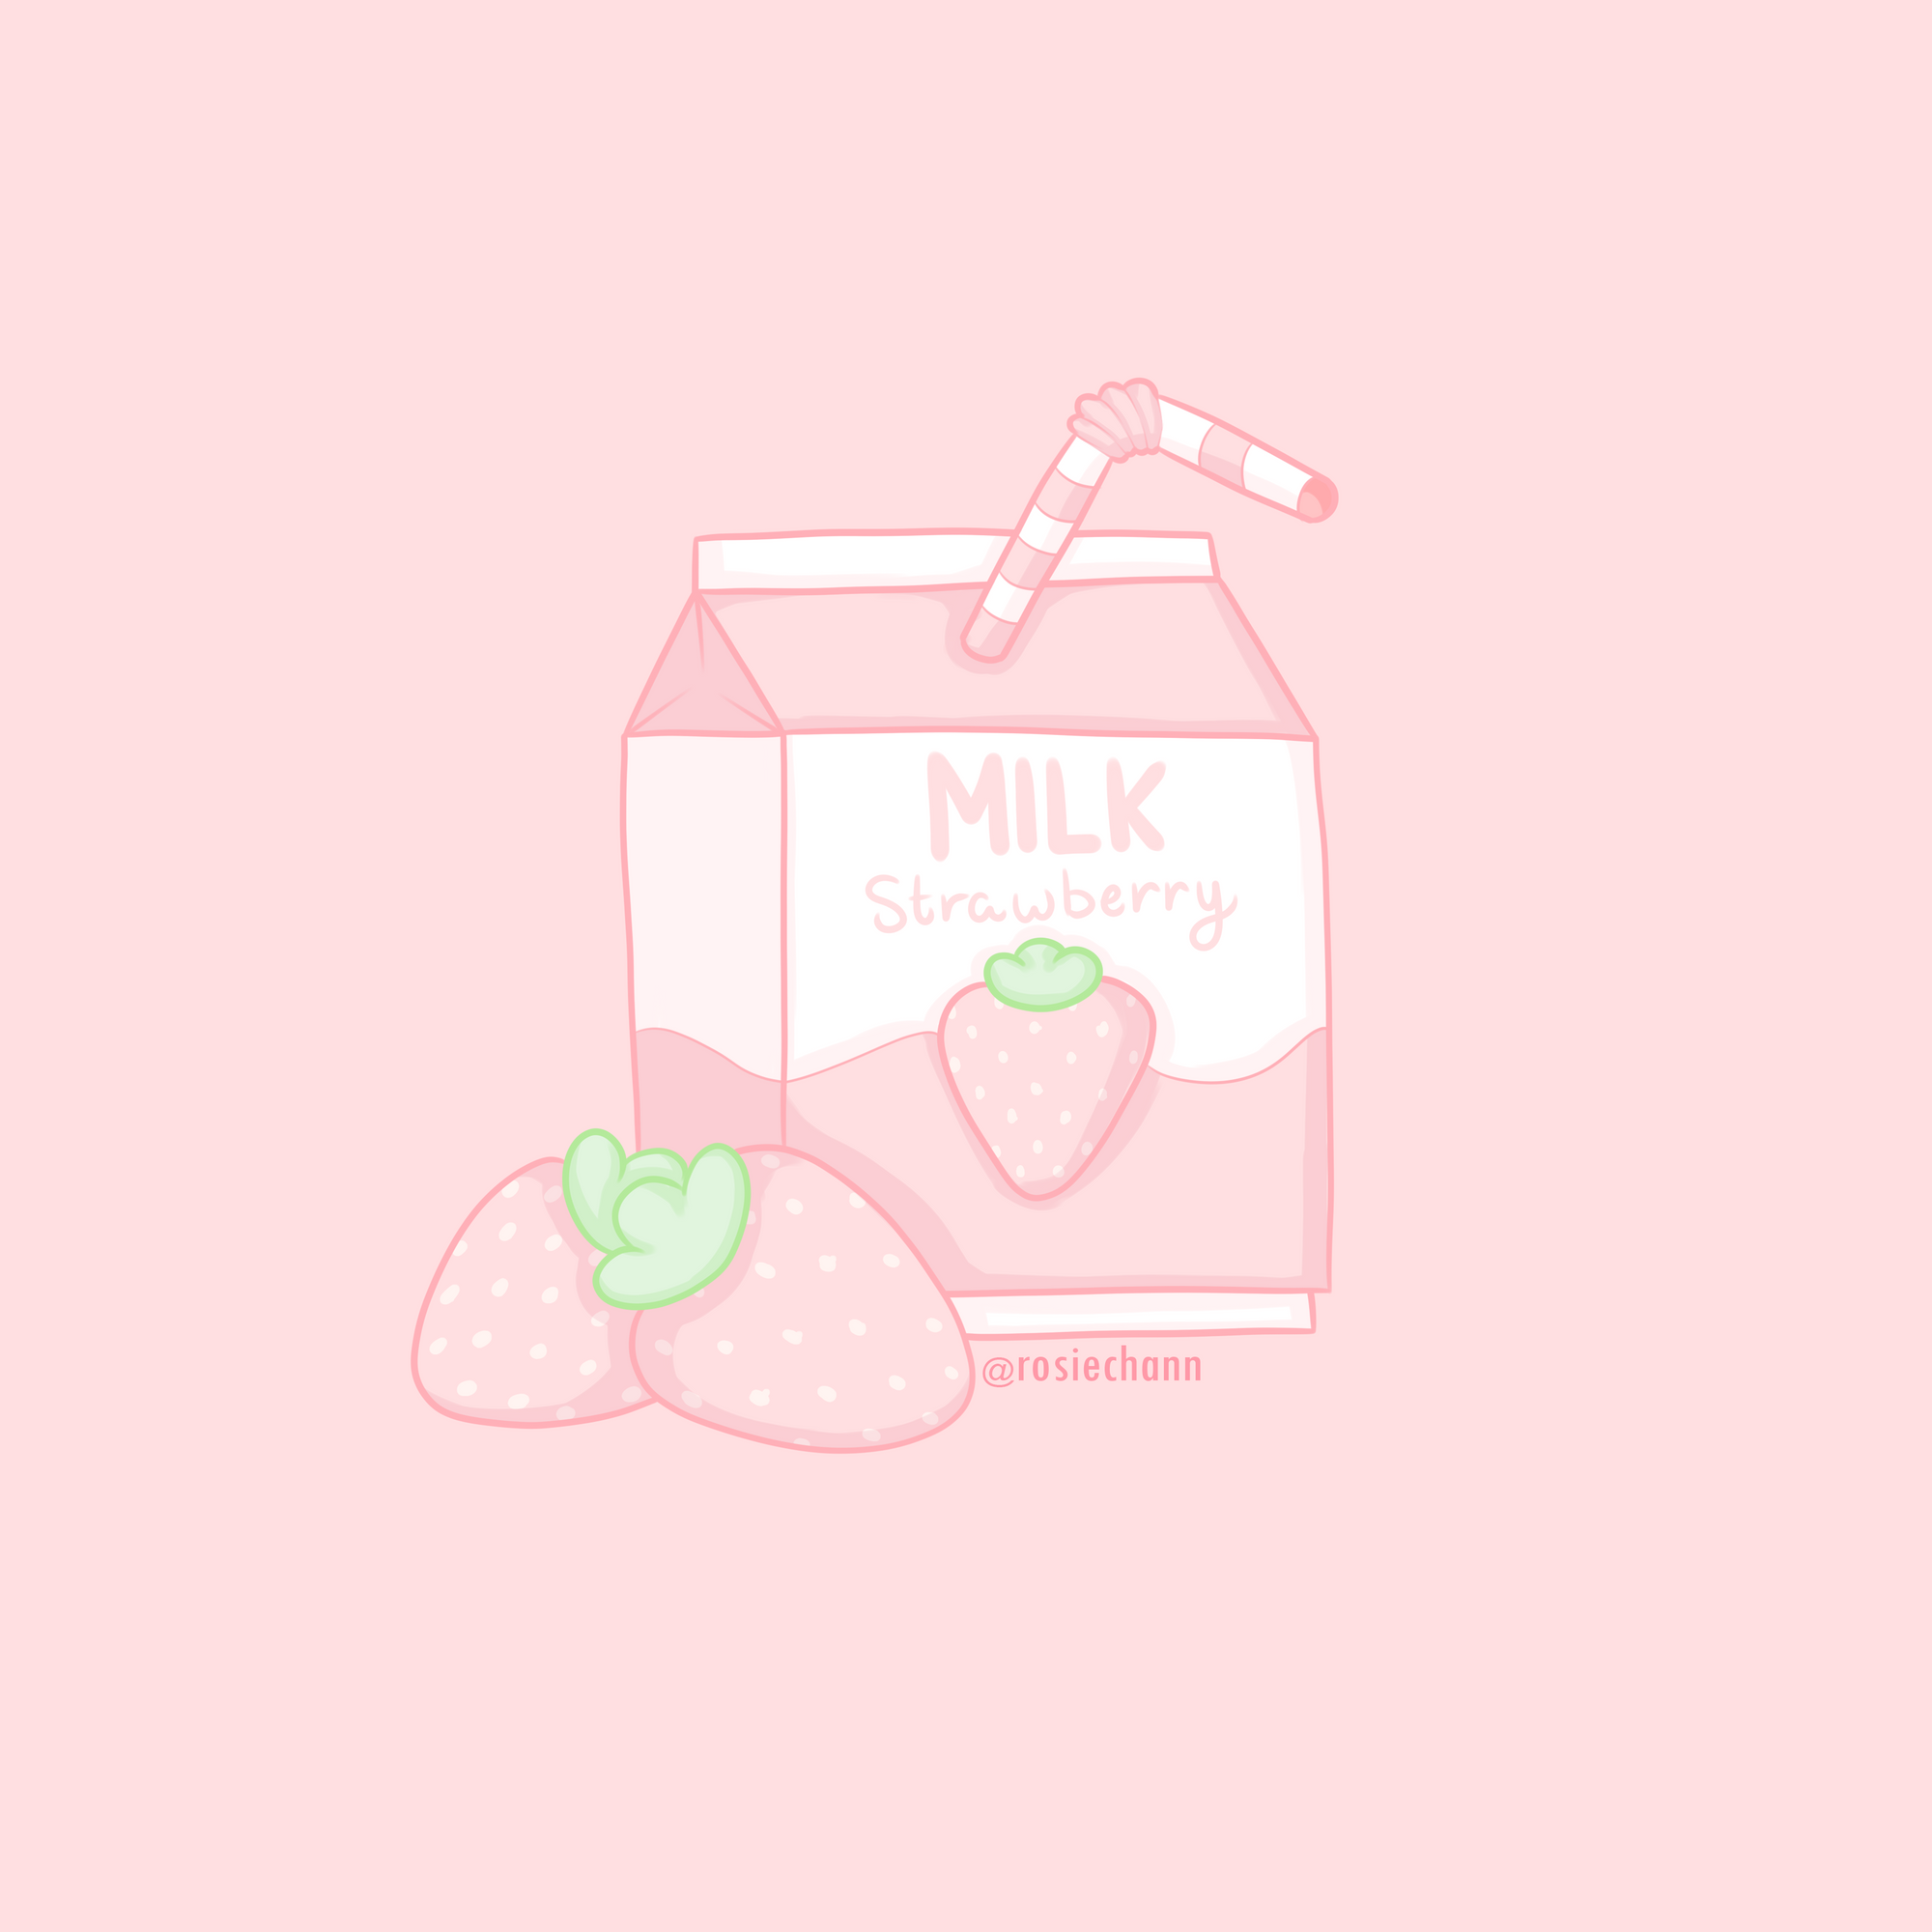 Pink Cow Strawberry Milk Kawaii Wallpapers Wallpaper Cave Choose from over a million free vectors, clipart graphics, vector art images, design templates, and illustrations created by artists worldwide! pink cow strawberry milk kawaii